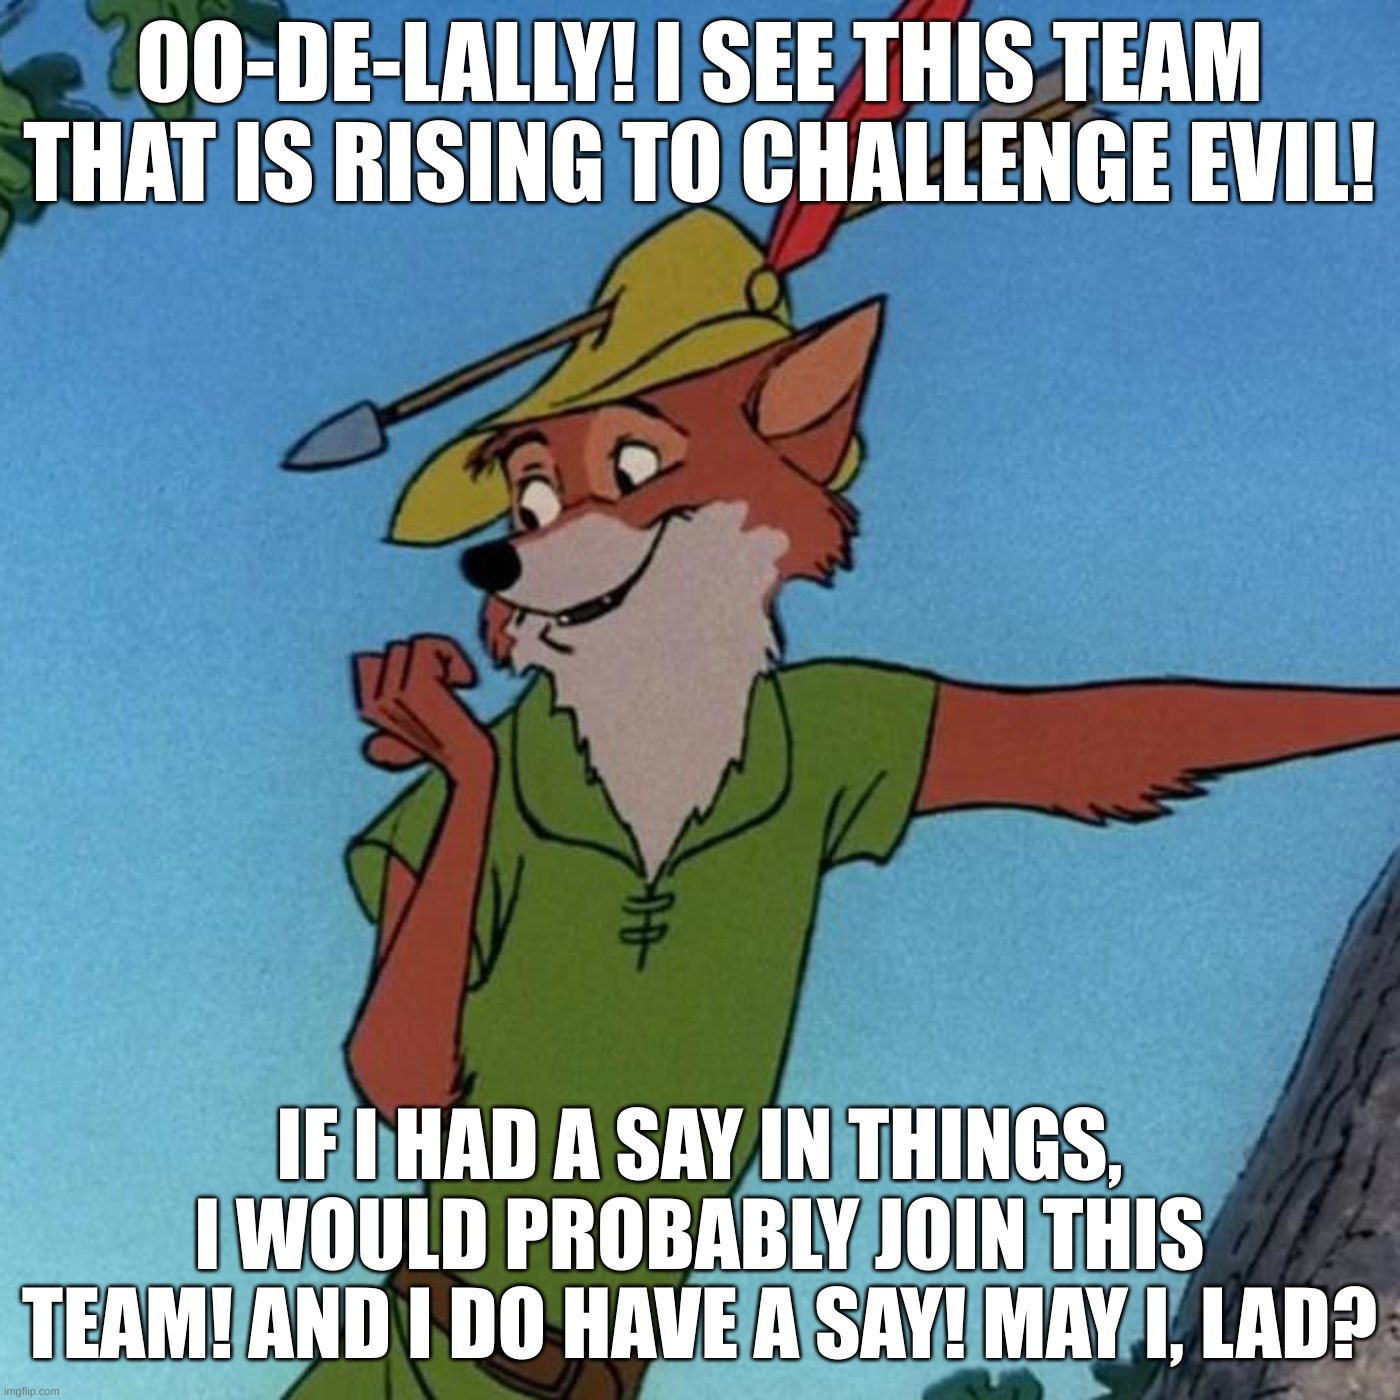 Robin Hood wants to join Team Earth(along with Little John, of course :D) | OO-DE-LALLY! I SEE THIS TEAM THAT IS RISING TO CHALLENGE EVIL! IF I HAD A SAY IN THINGS, I WOULD PROBABLY JOIN THIS TEAM! AND I DO HAVE A SAY! MAY I, LAD? | image tagged in close call robin hood | made w/ Imgflip meme maker